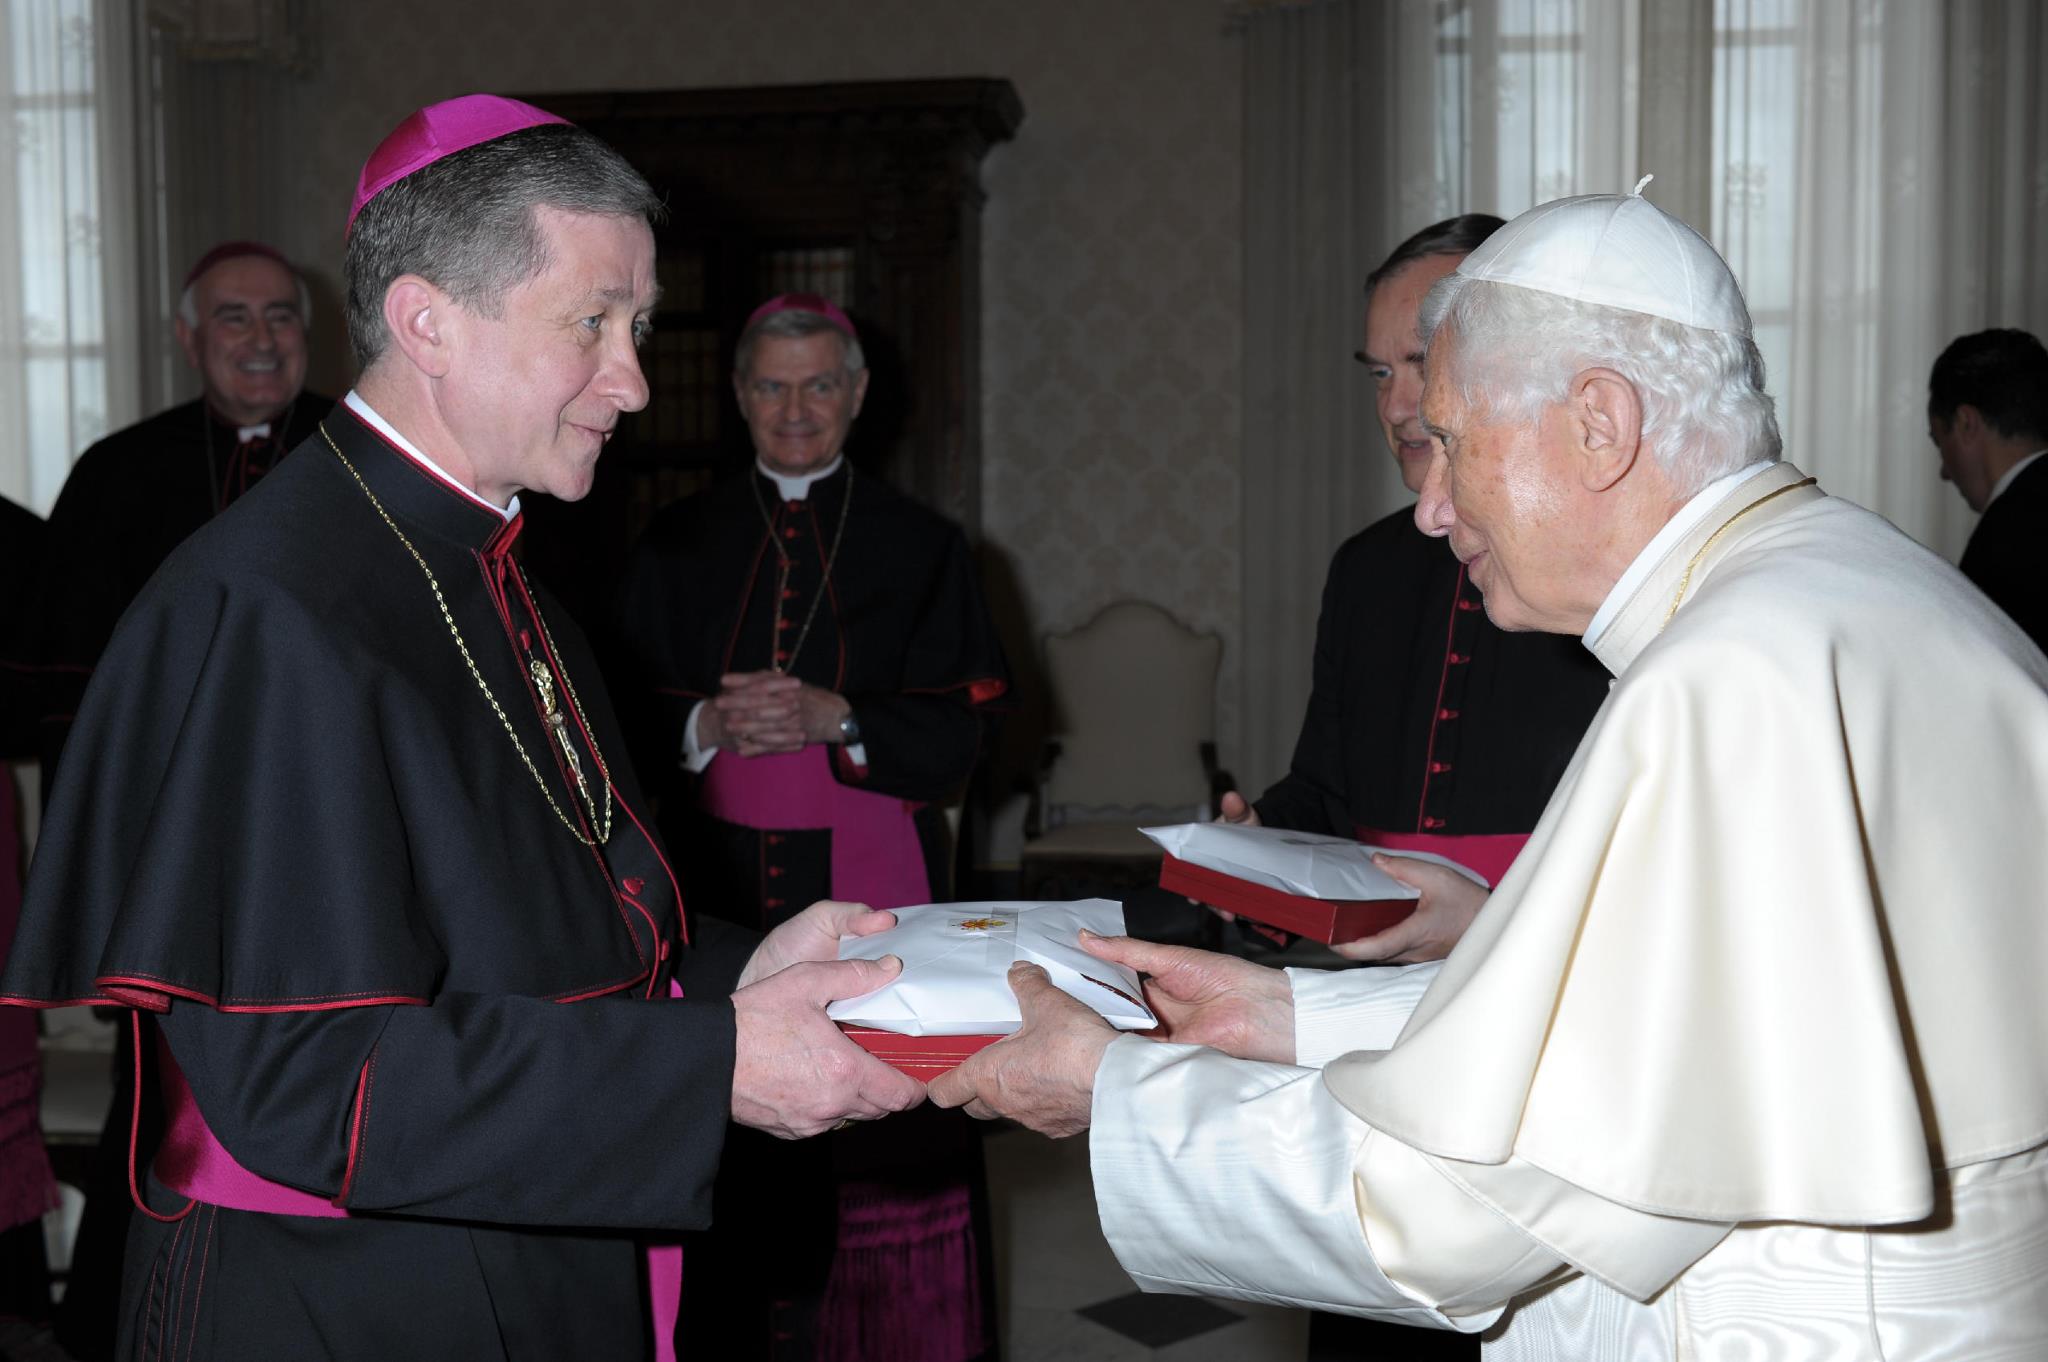 Bishop Cupich receives a gift from Pope Benedict